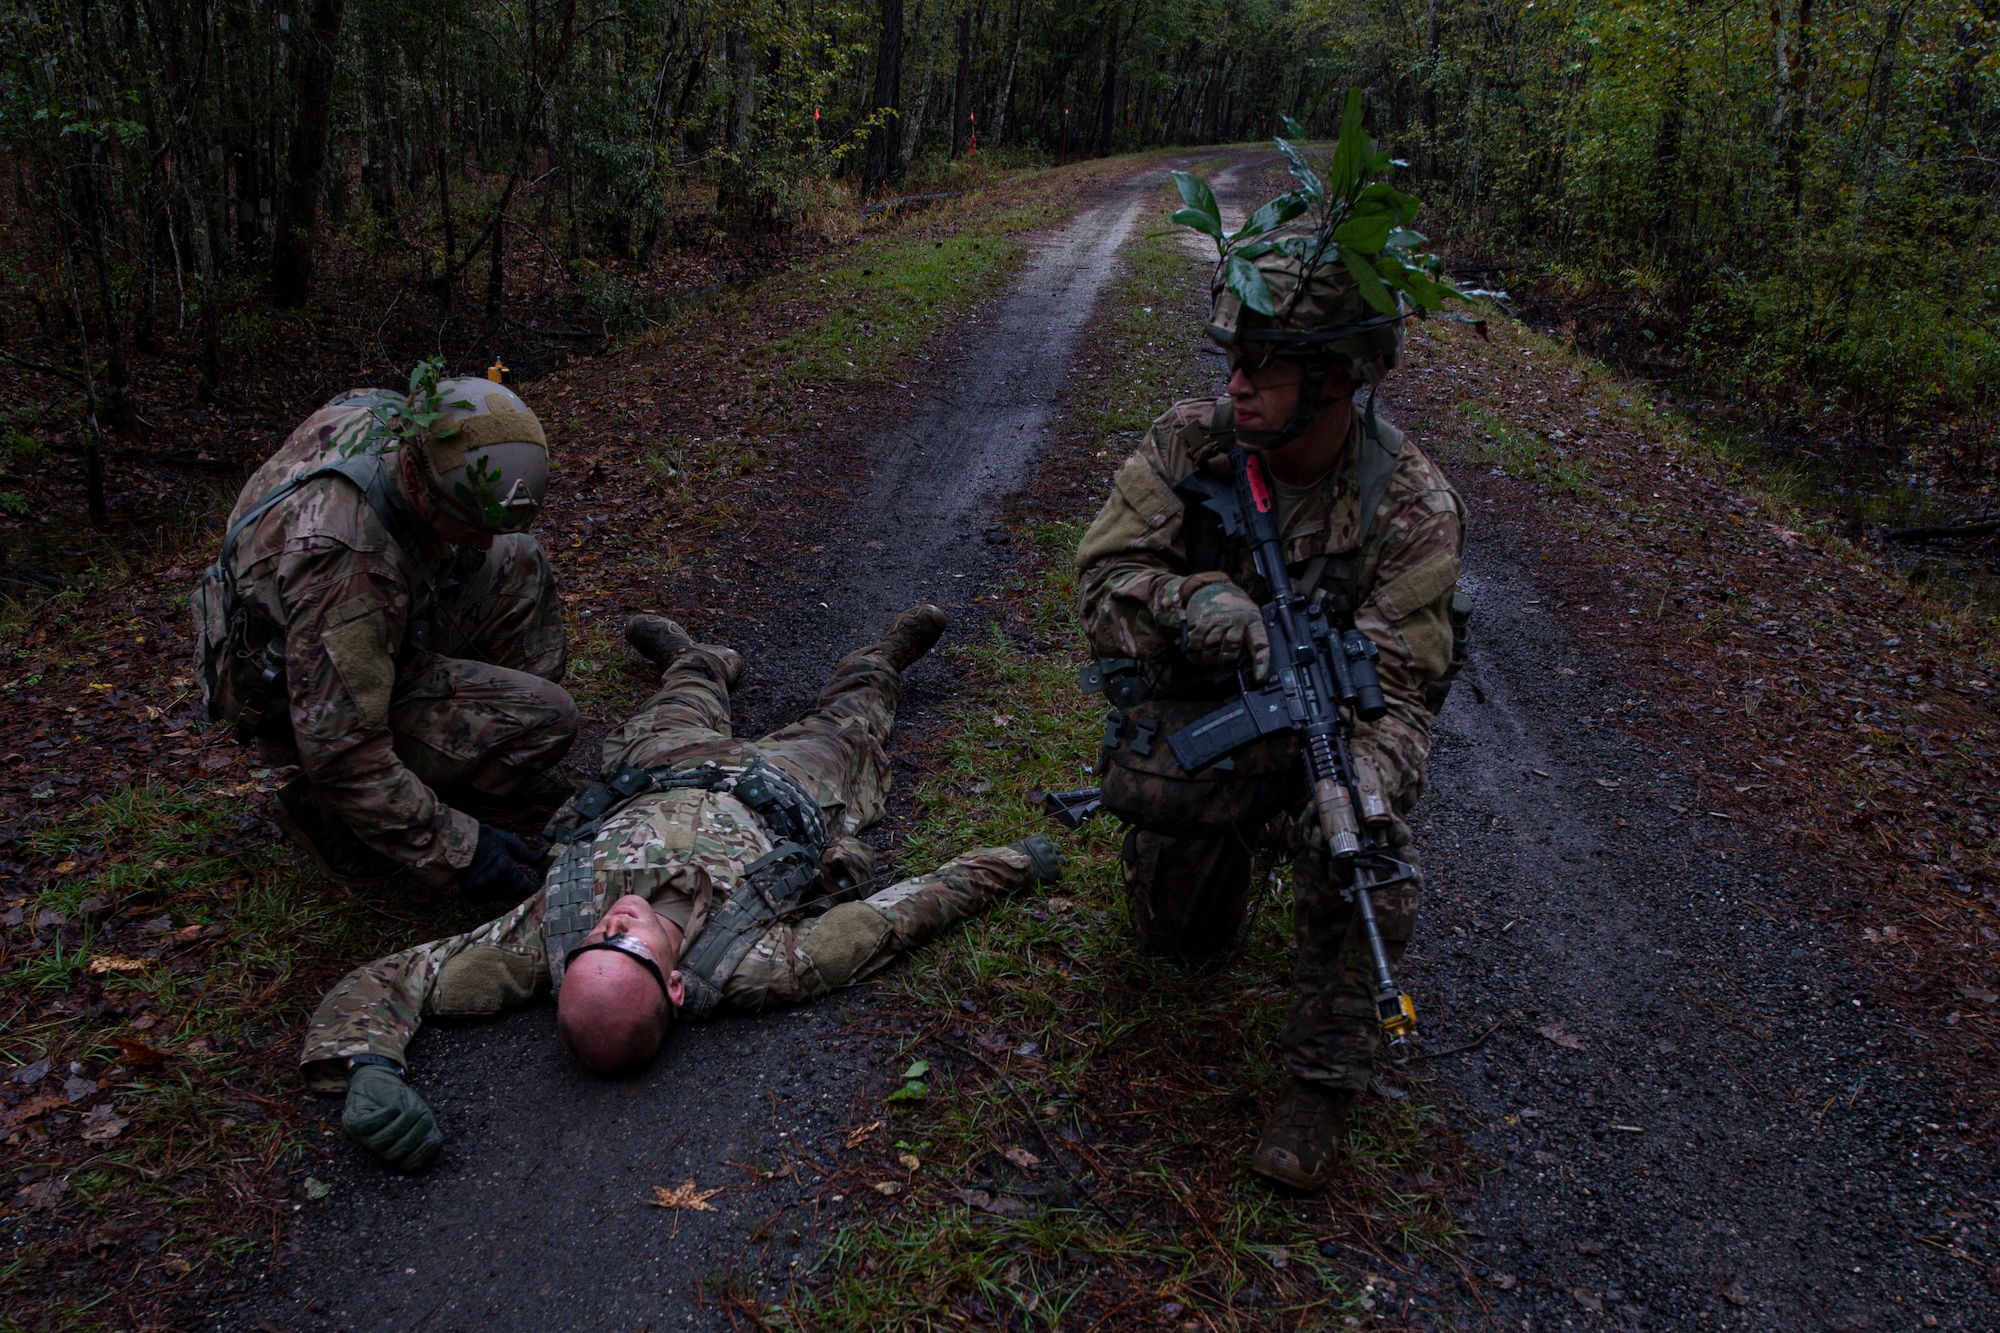 Students of the Air Force Ranger Assessment Course perform a simulated casualty search Nov. 15, 2019, at Moody Air Force Base, Ga. The course teaches students critical tasks such as land navigation, troop movements and shooting and maintaining weapons. Over the course of 19 days, the Ranger Assessment Course evaluates students to determine if they possess the knowledge, willpower and skill to attend Army Ranger School. (U.S. Air Force photo by Airman Azaria E. Foste